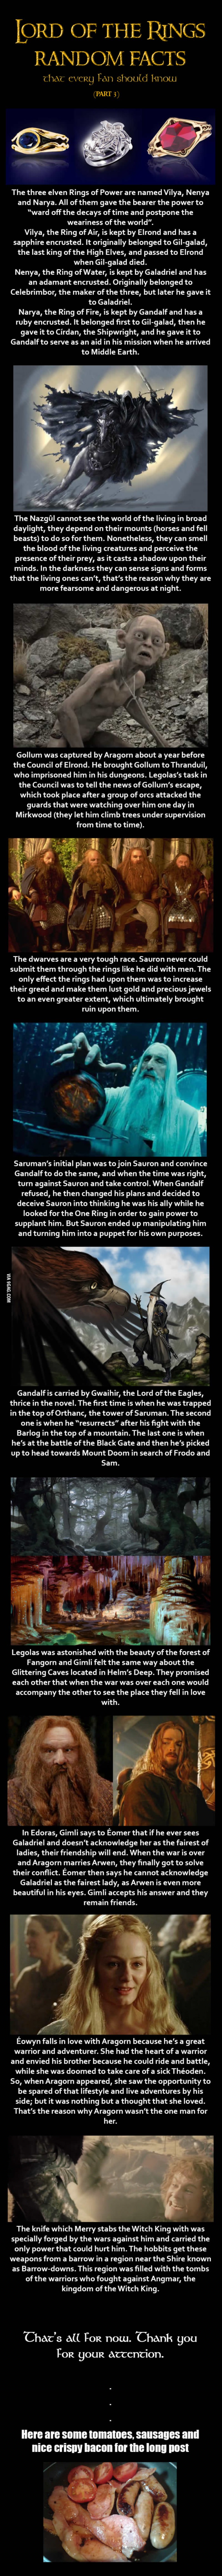 Lord of the Rings Random Facts Part 3